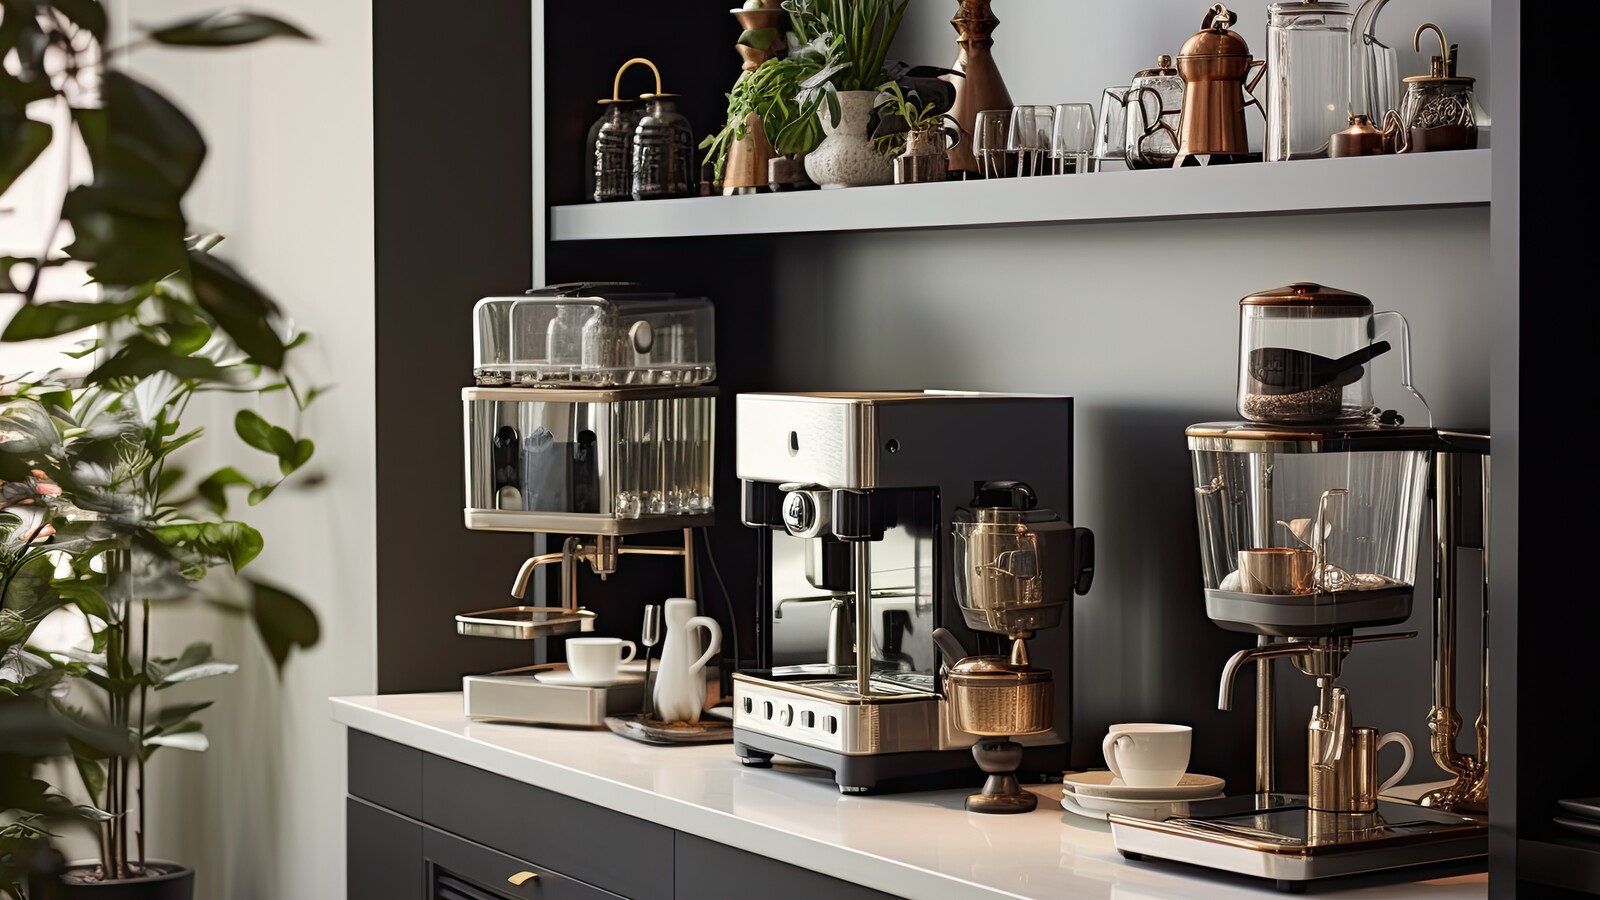 21 Coffee Station Ideas For The Ultimate At-Home Brew